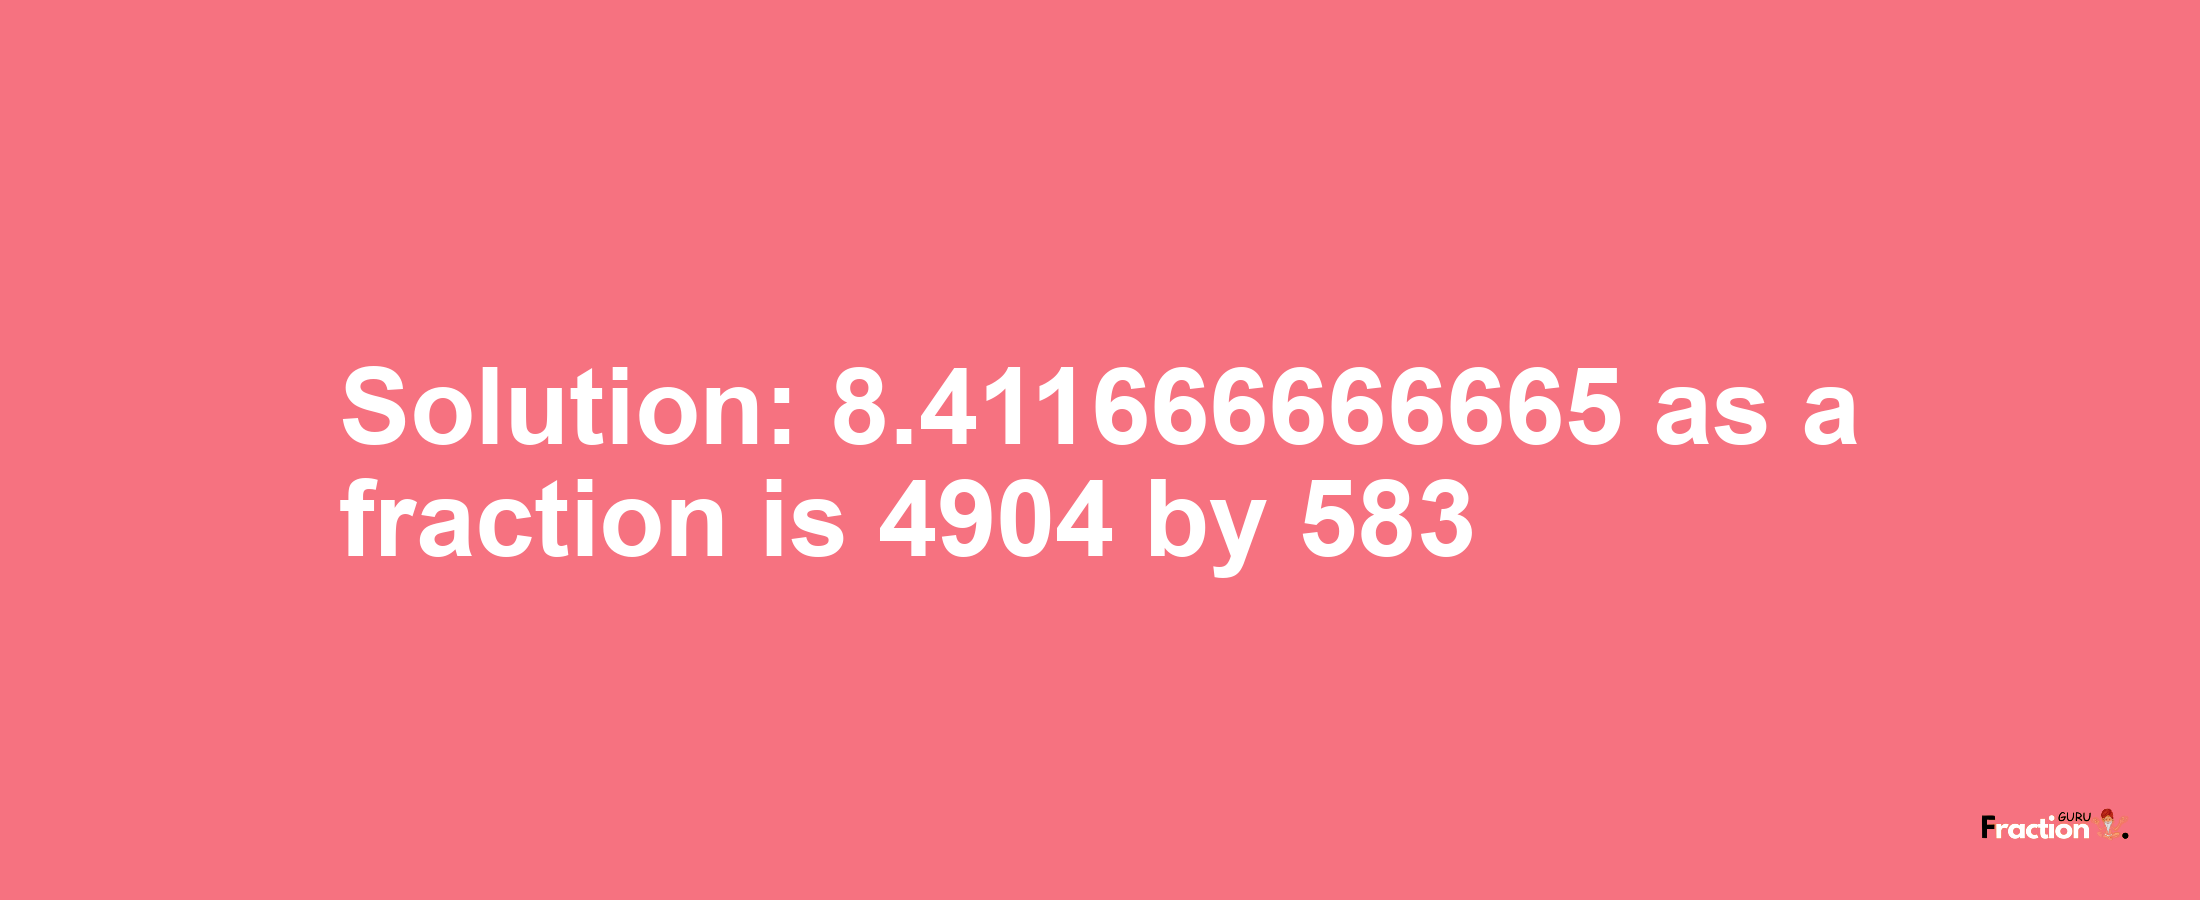 Solution:8.411666666665 as a fraction is 4904/583